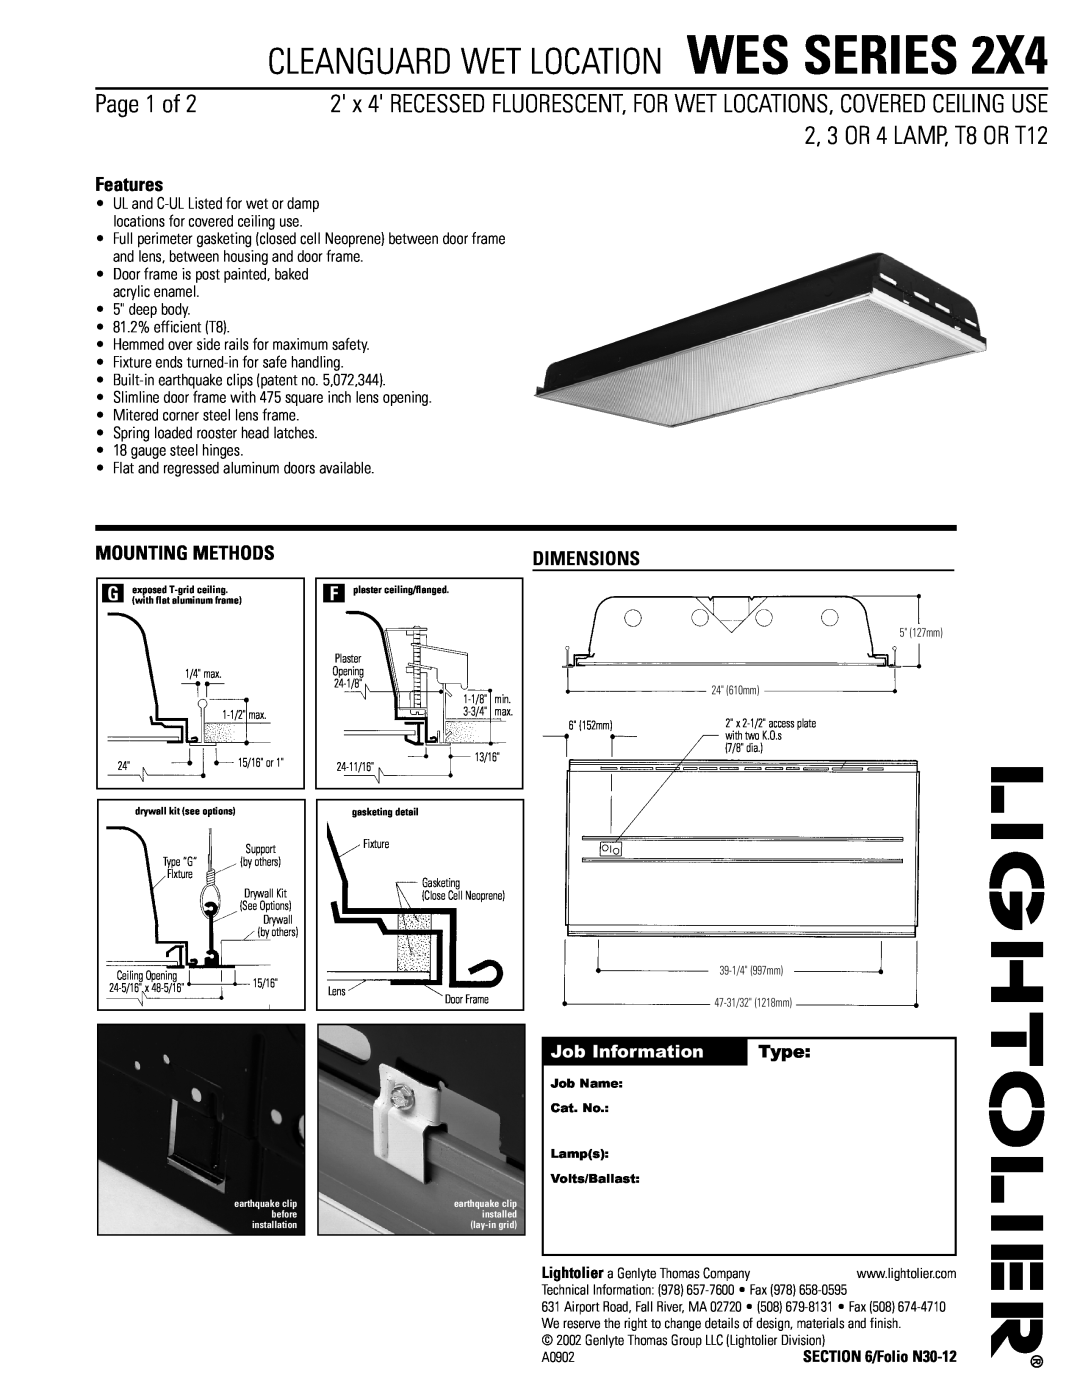 Lightolier WES SERIES 2X4 dimensions Cleanguard Wet Location Wes Series, Page 1 of, 2, 3 OR 4 LAMP, T8 OR T12, Features 